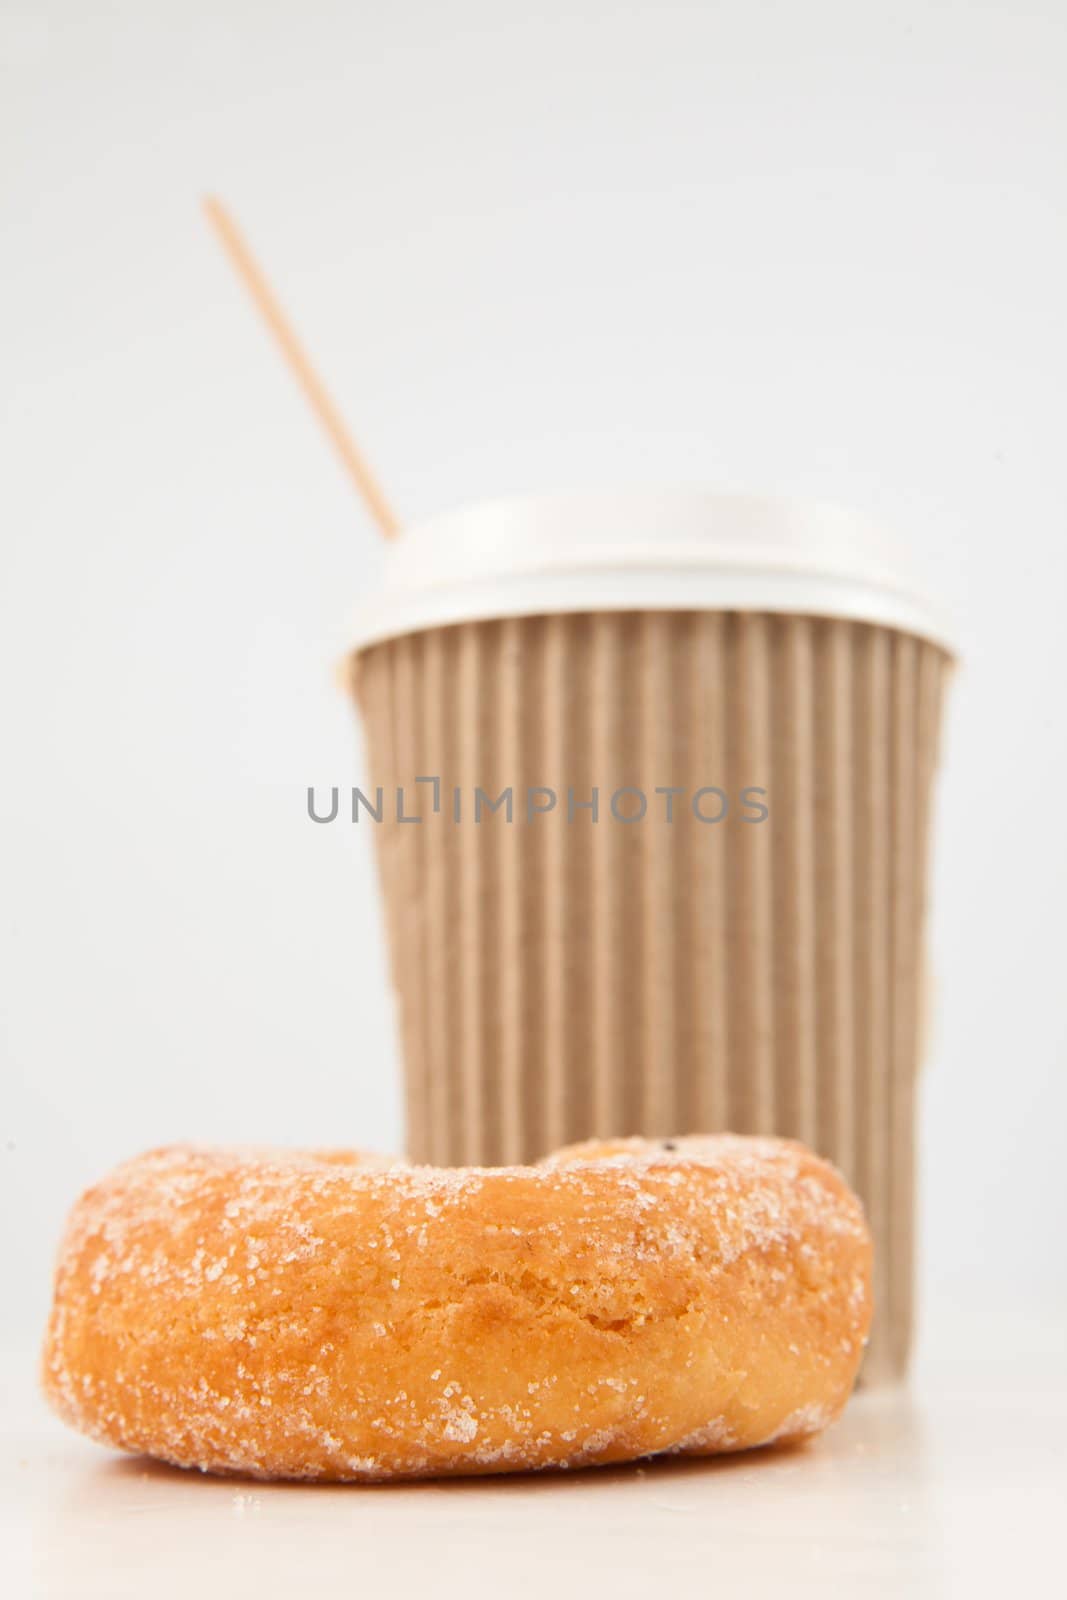 A doughnut and a cup of coffee placed side by side by Wavebreakmedia